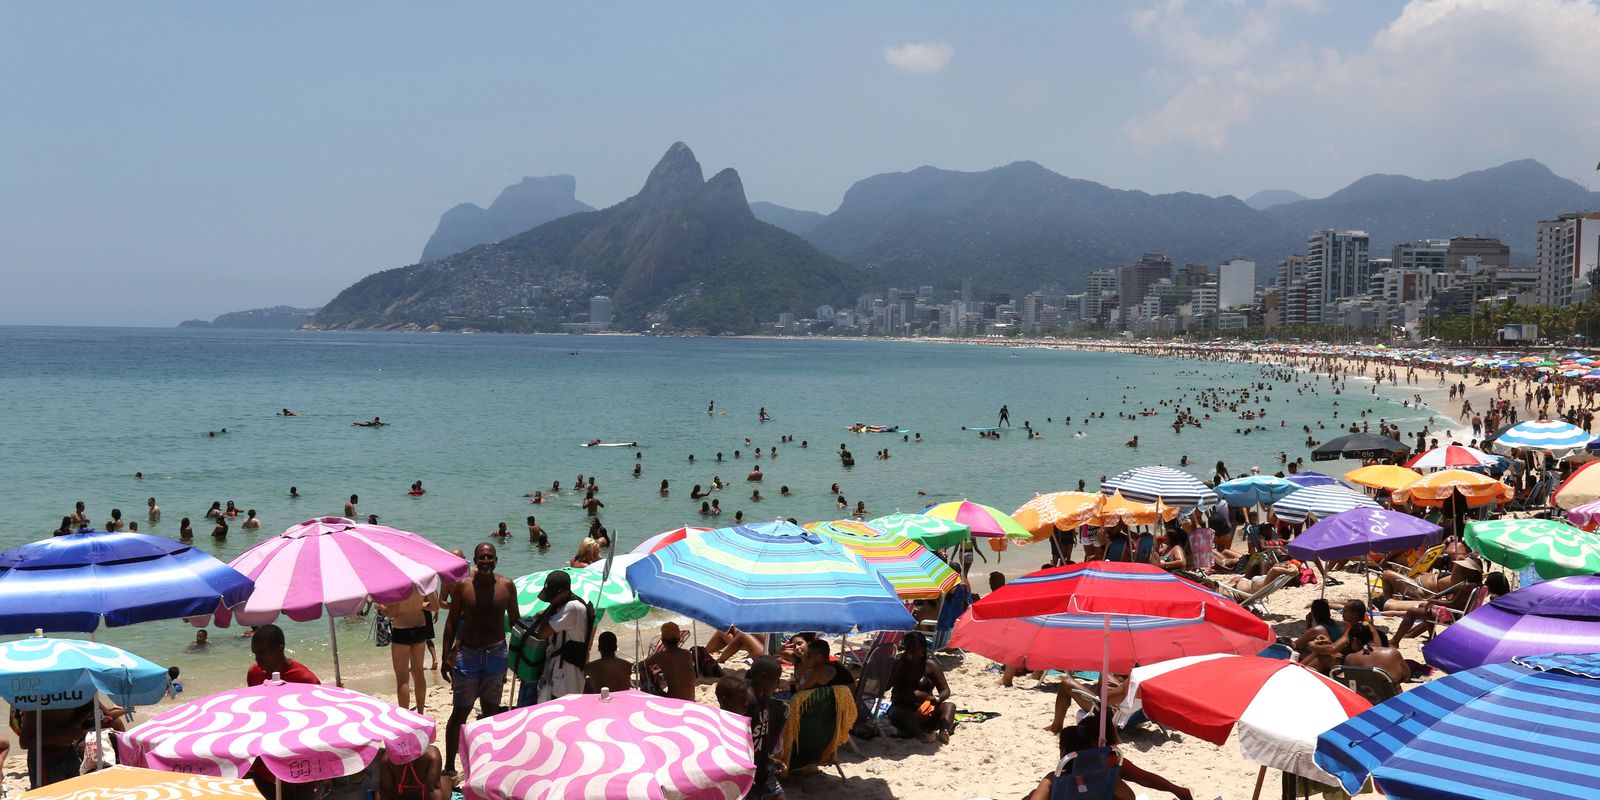 More than 610 tons of garbage are collected from the beaches of Rio